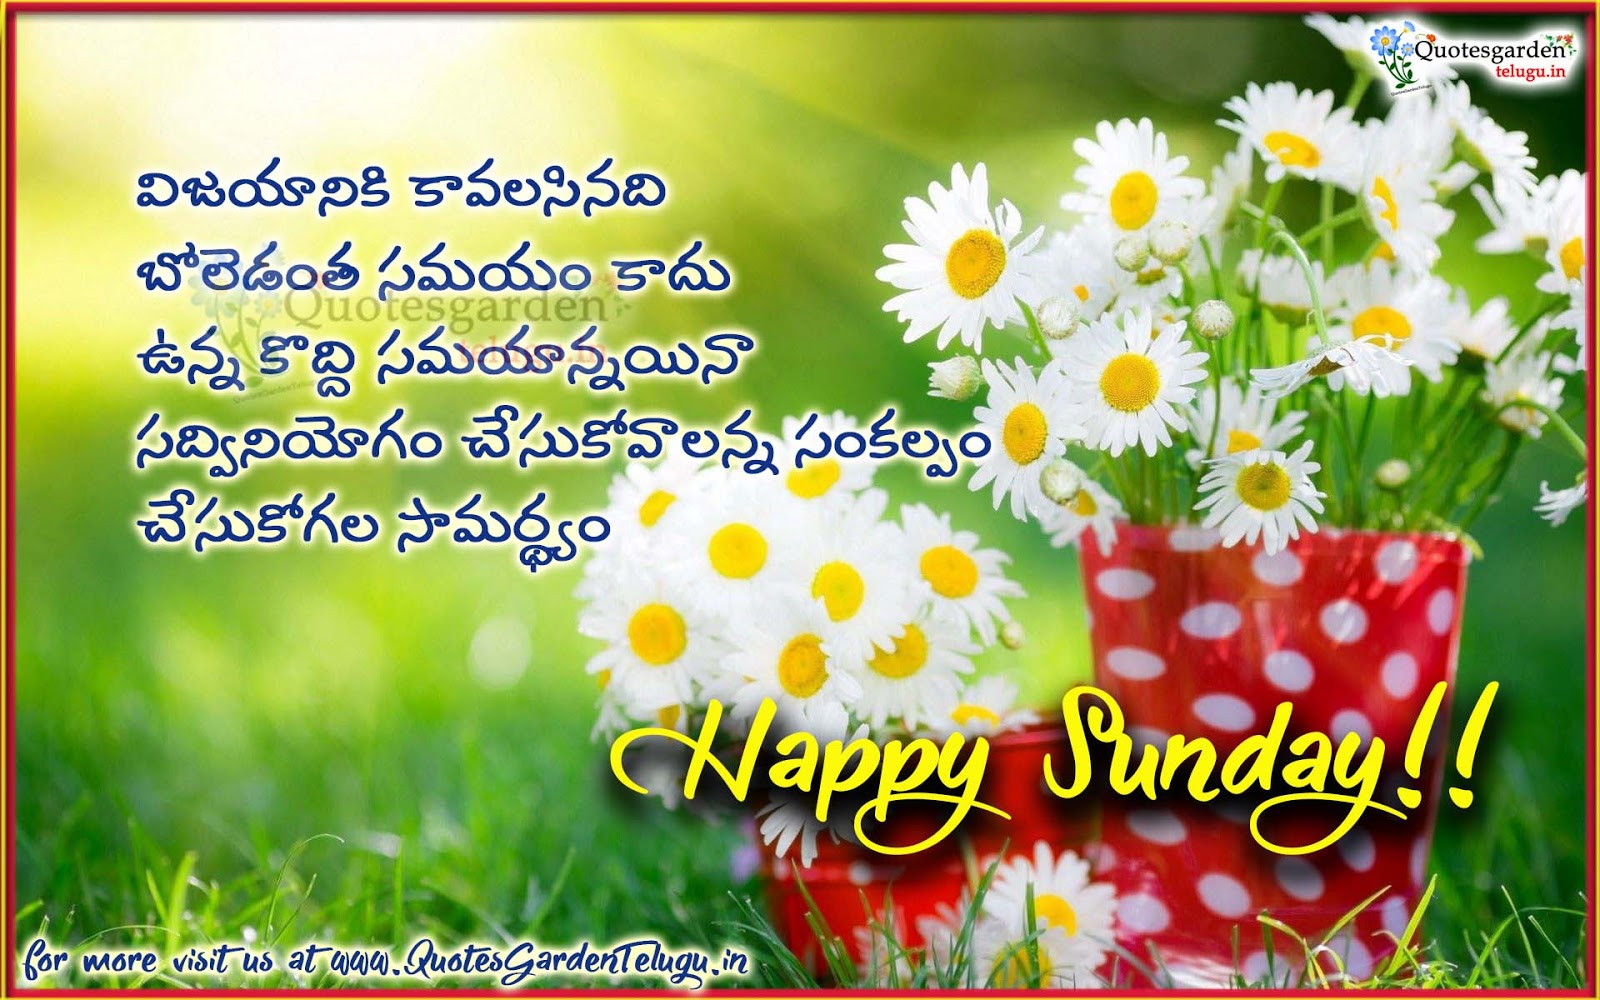 Best Telugu Sunday messages quotes sms - Happy Sunday Quotes Telugu  messages | QUOTES GARDEN TELUGU | Telugu Quotes | English Quotes | Hindi  Quotes |